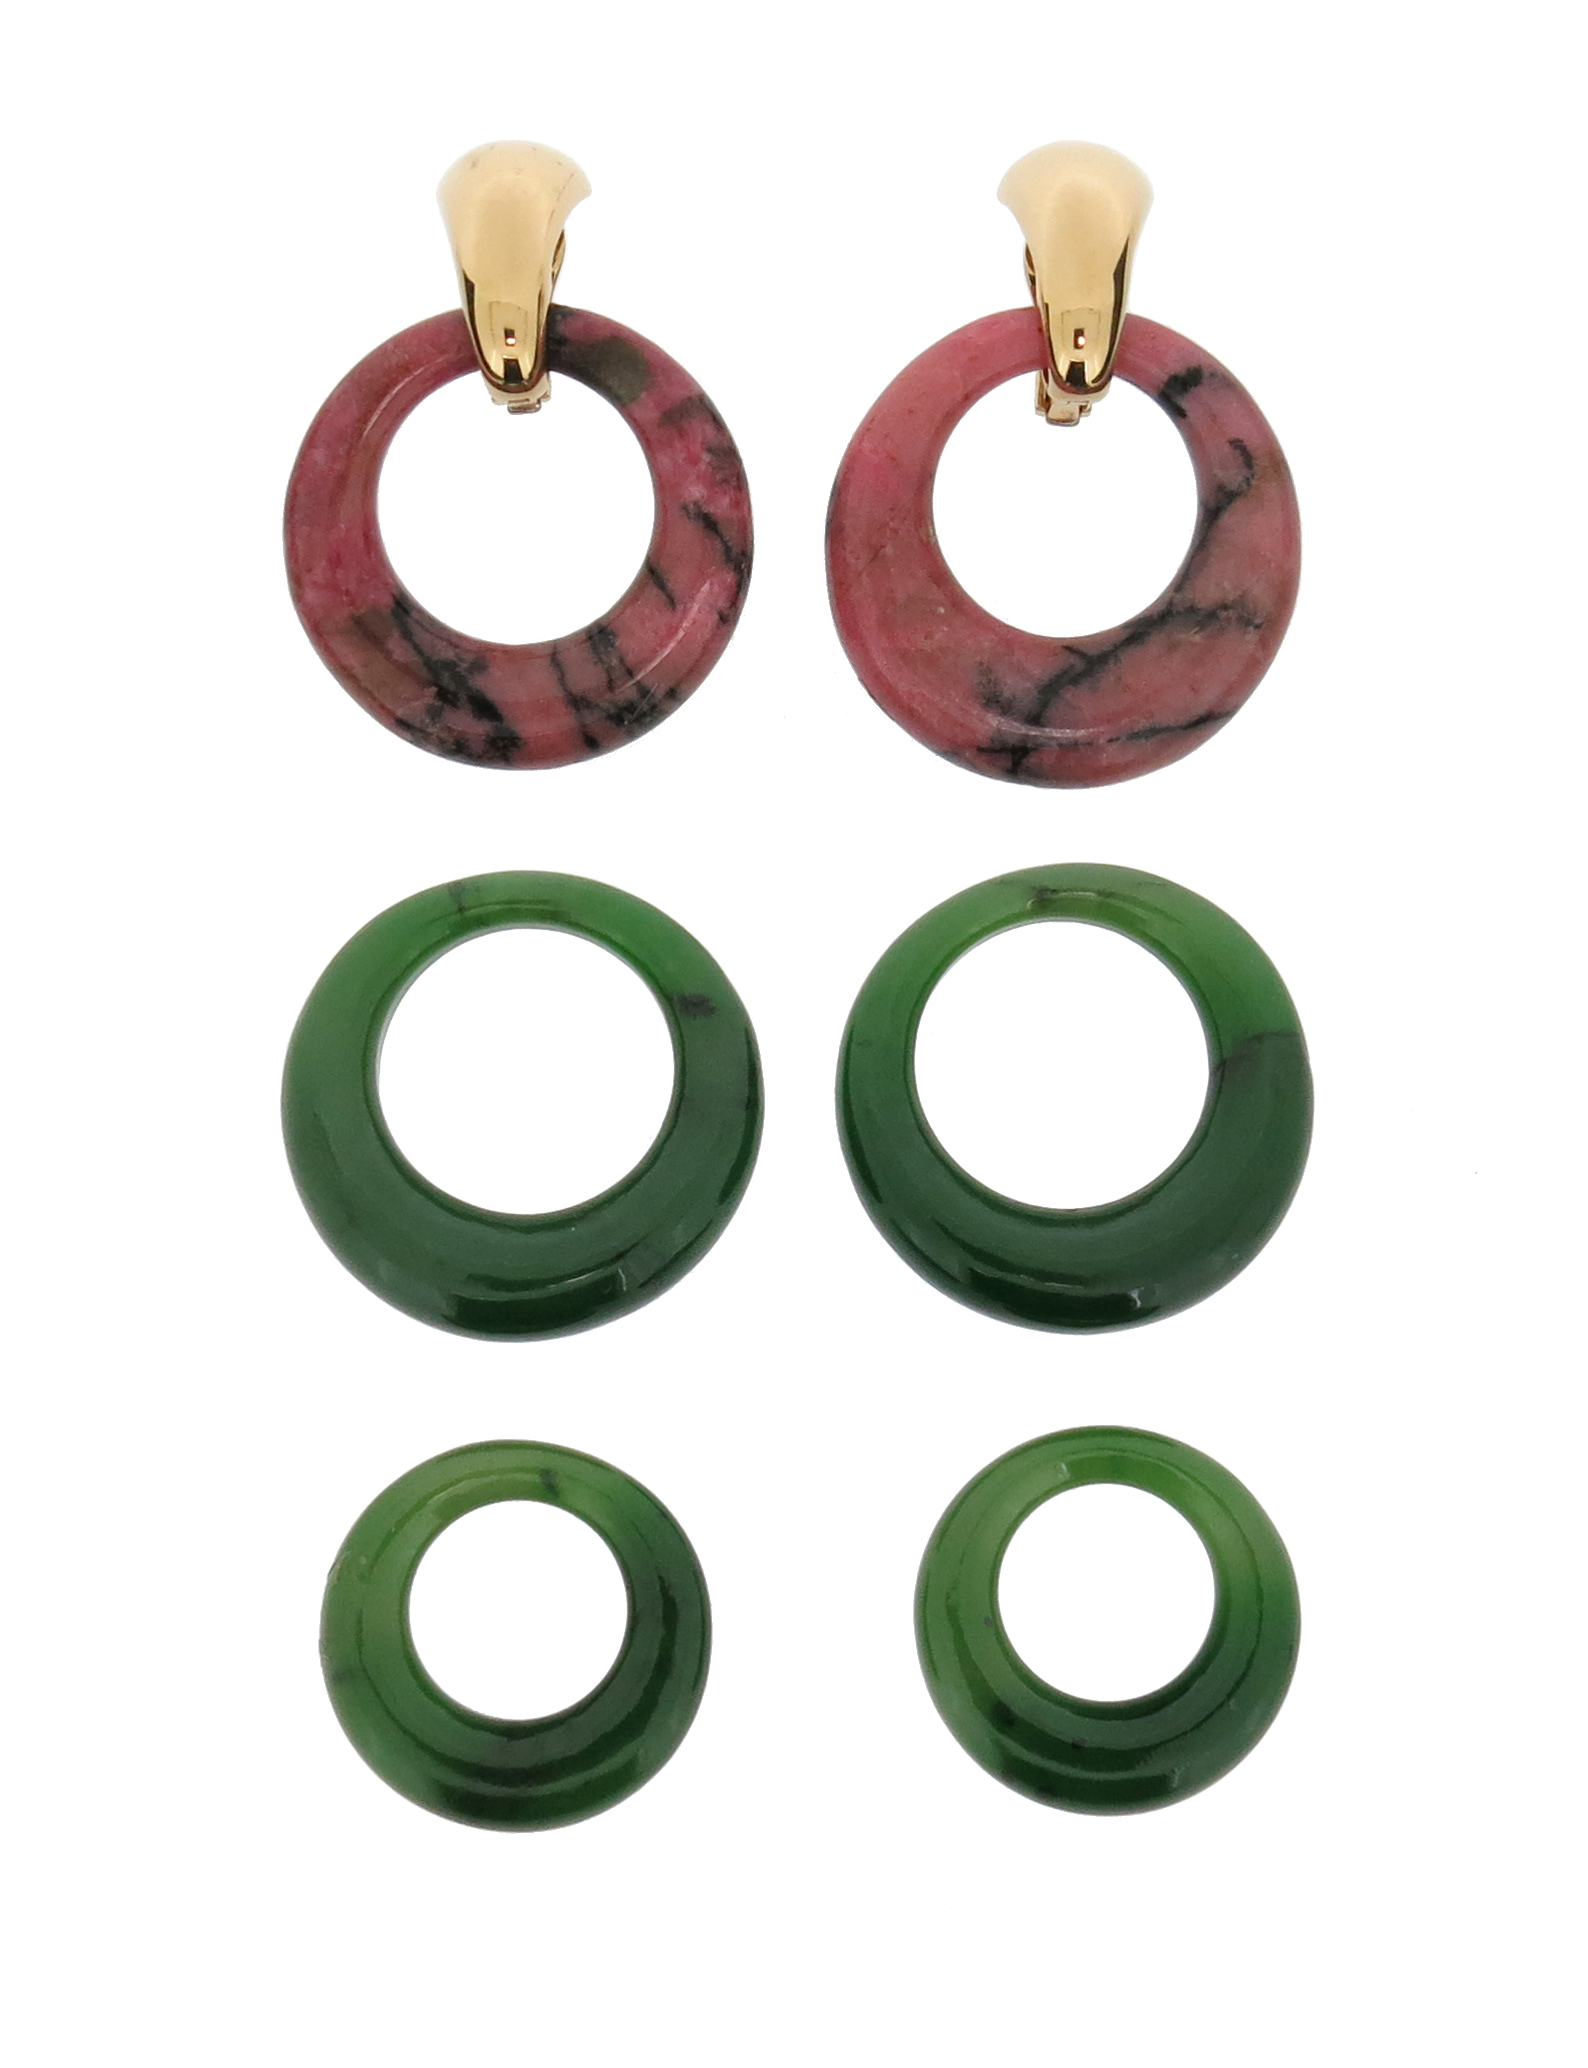 A pair of yellow gold earrings, opening to suspend interchangeable nephrite and rhodonite hoops, - Image 2 of 3